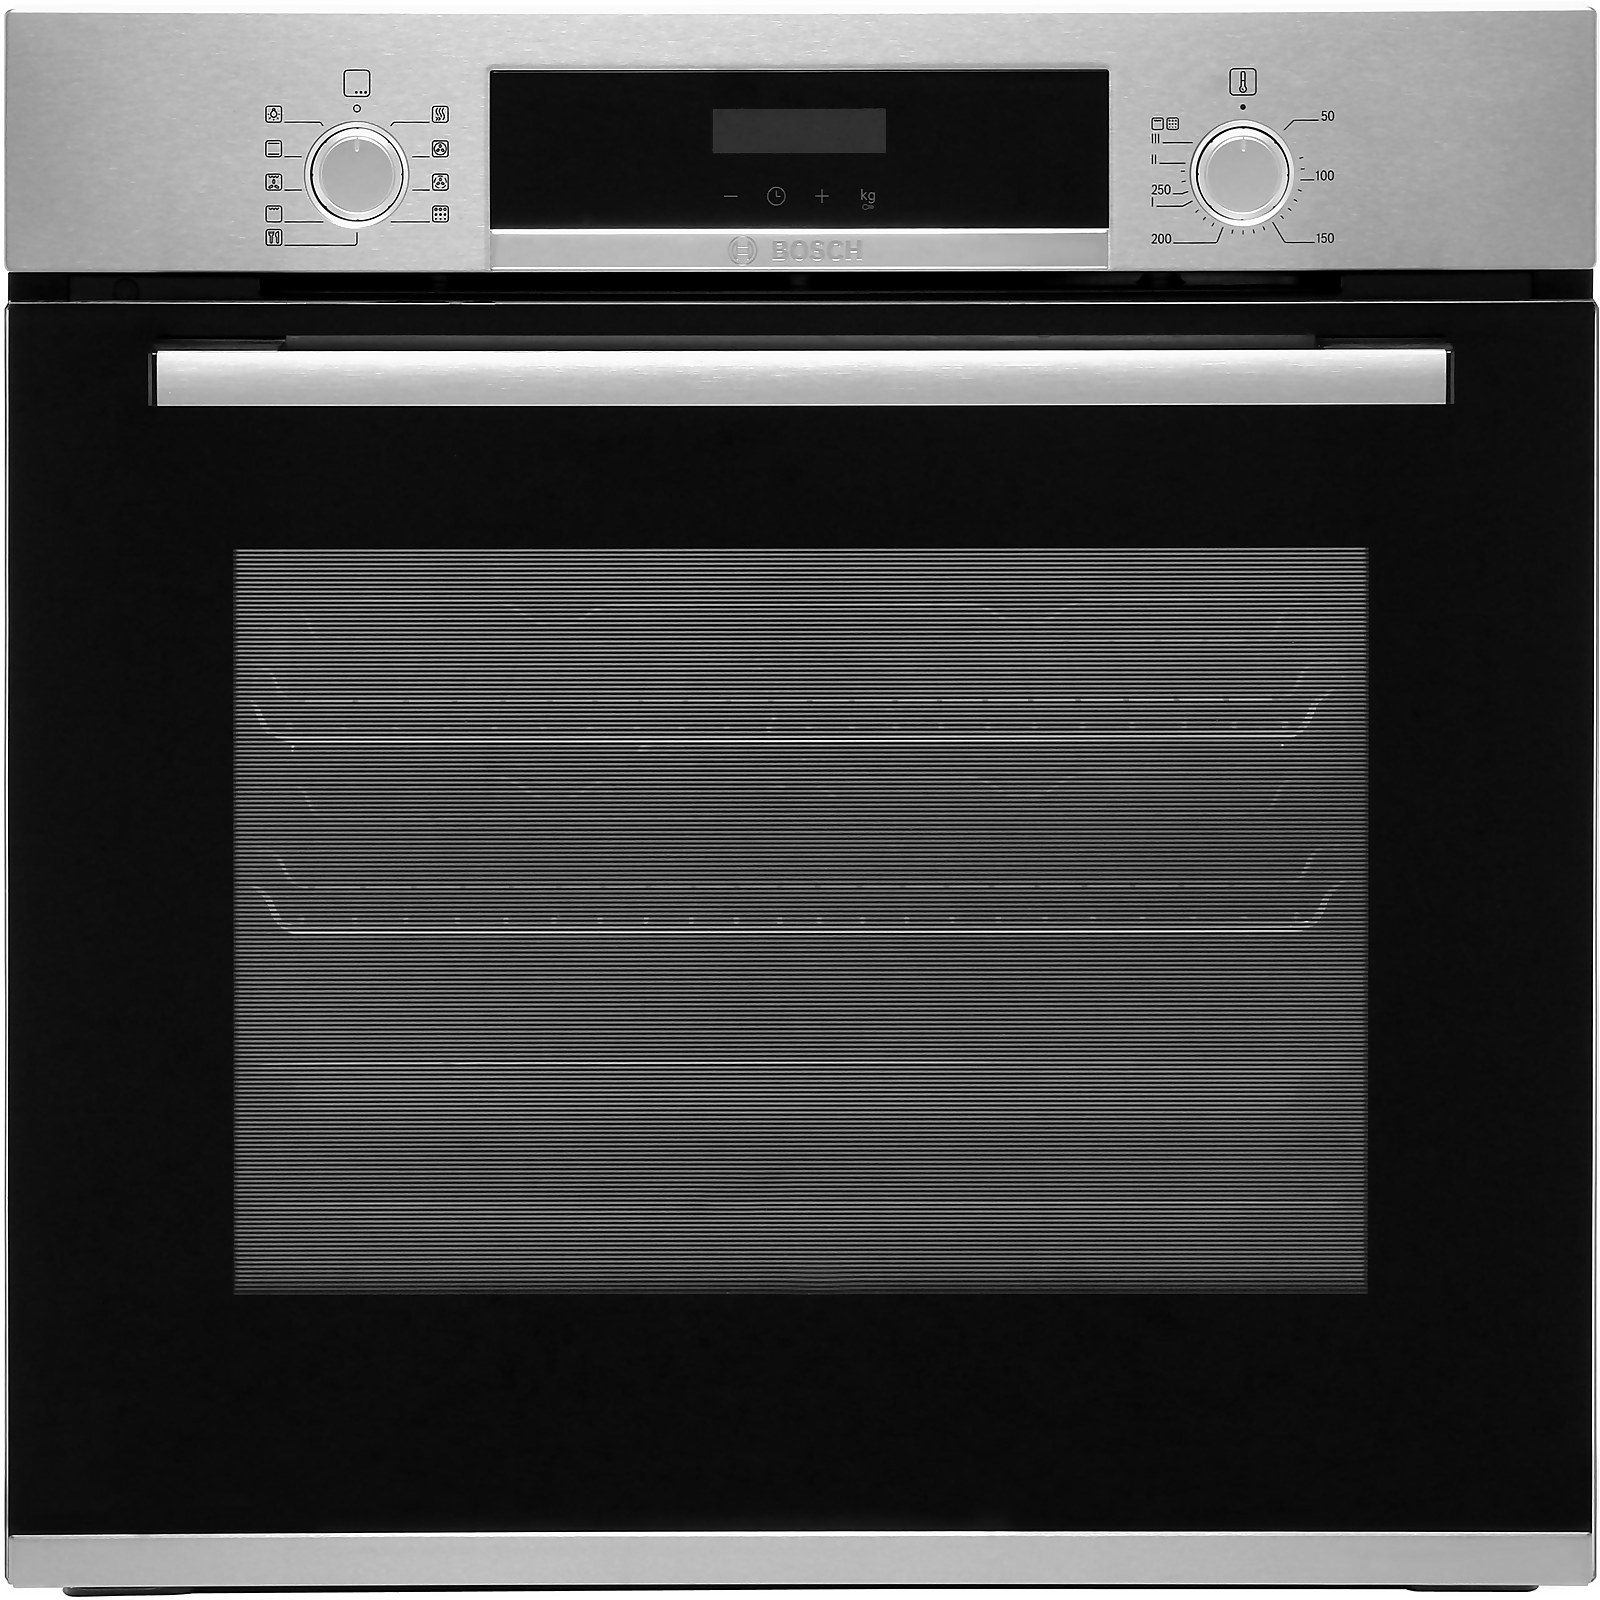 Photo of Bosch Serie 4 Hbs573bs0b Built In Electric Single Oven - Stainless Steel